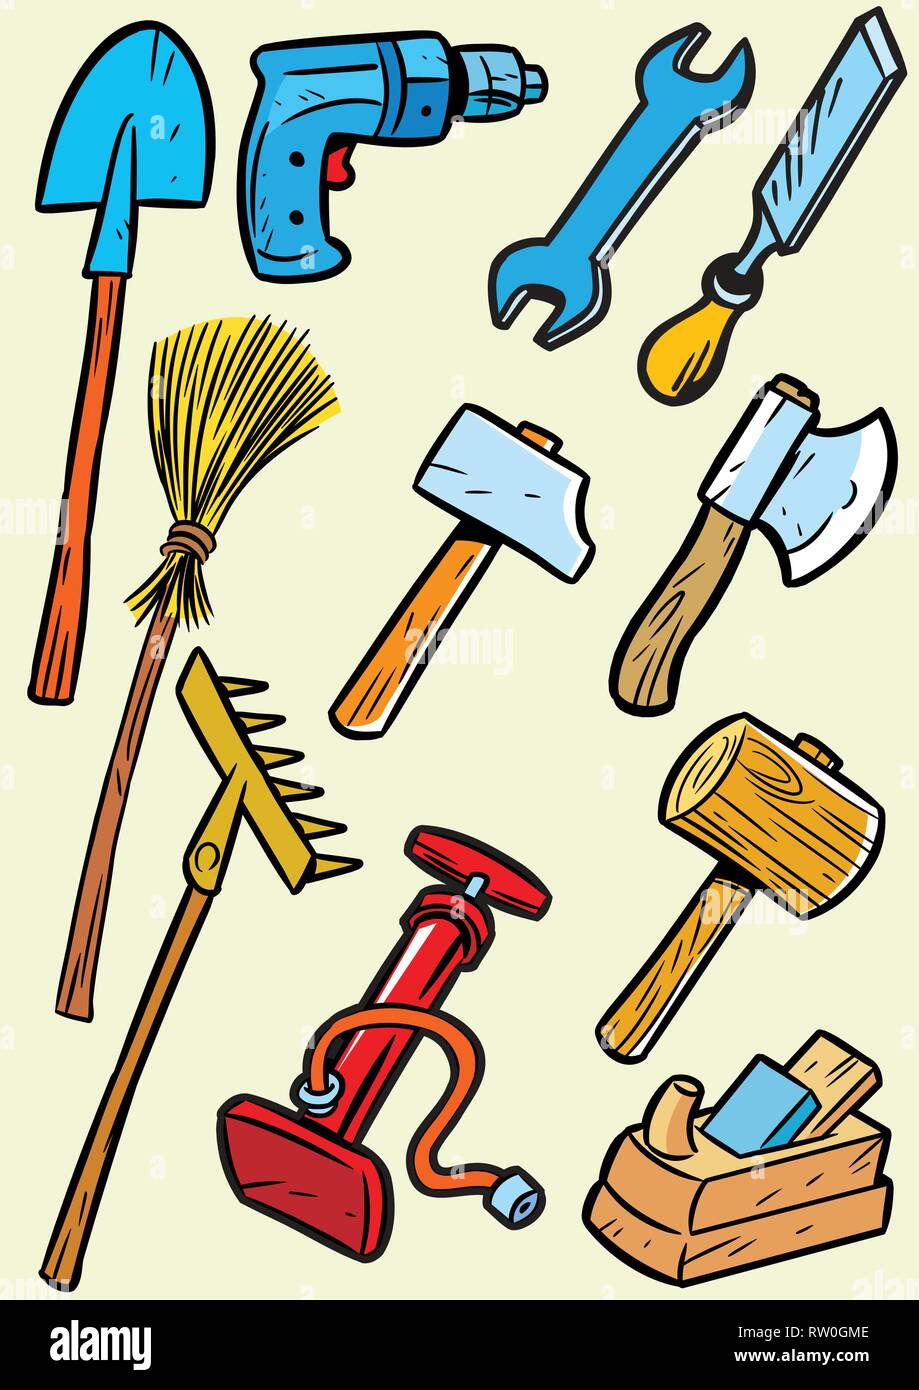 Cartoon Hardware Tools Collection High Resolution Stock Photography and